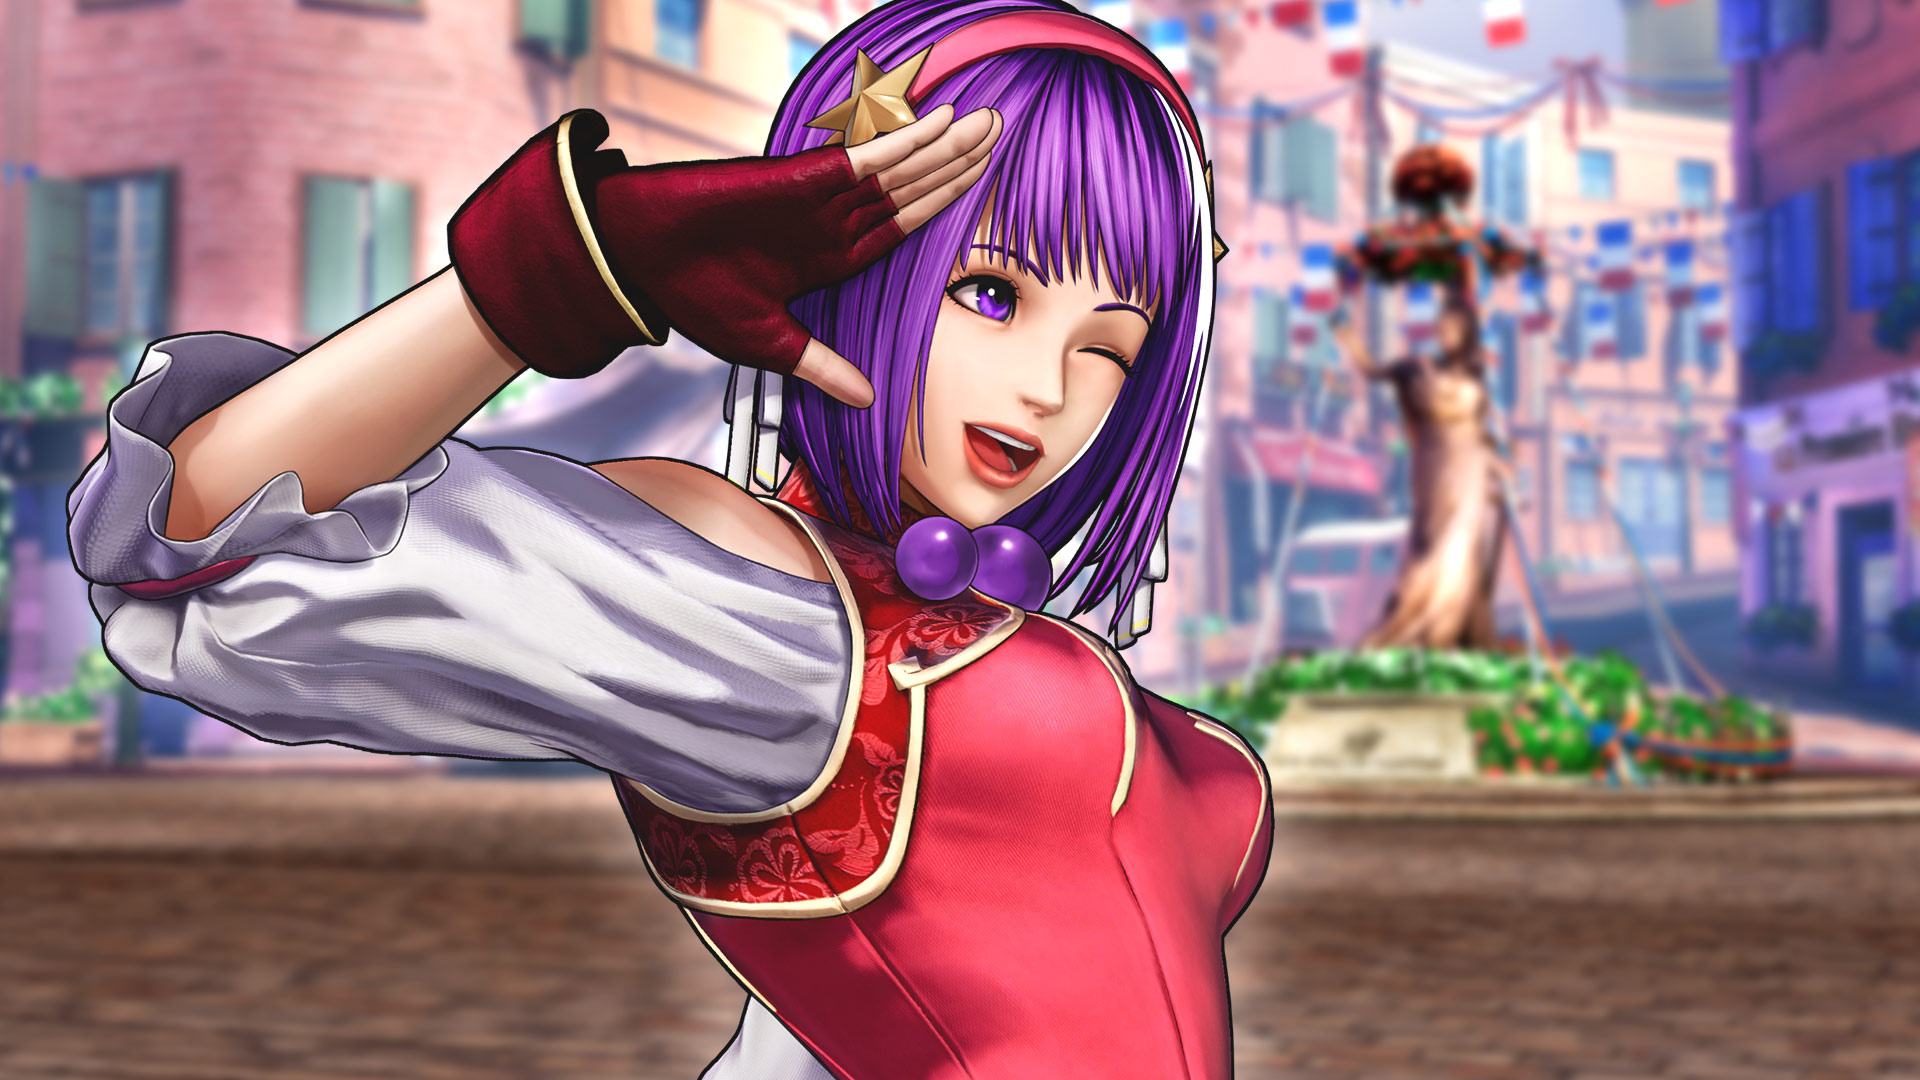 King of Fighters XV, Wallpapers, 10 wallpapers, 1920x1080 Full HD Desktop